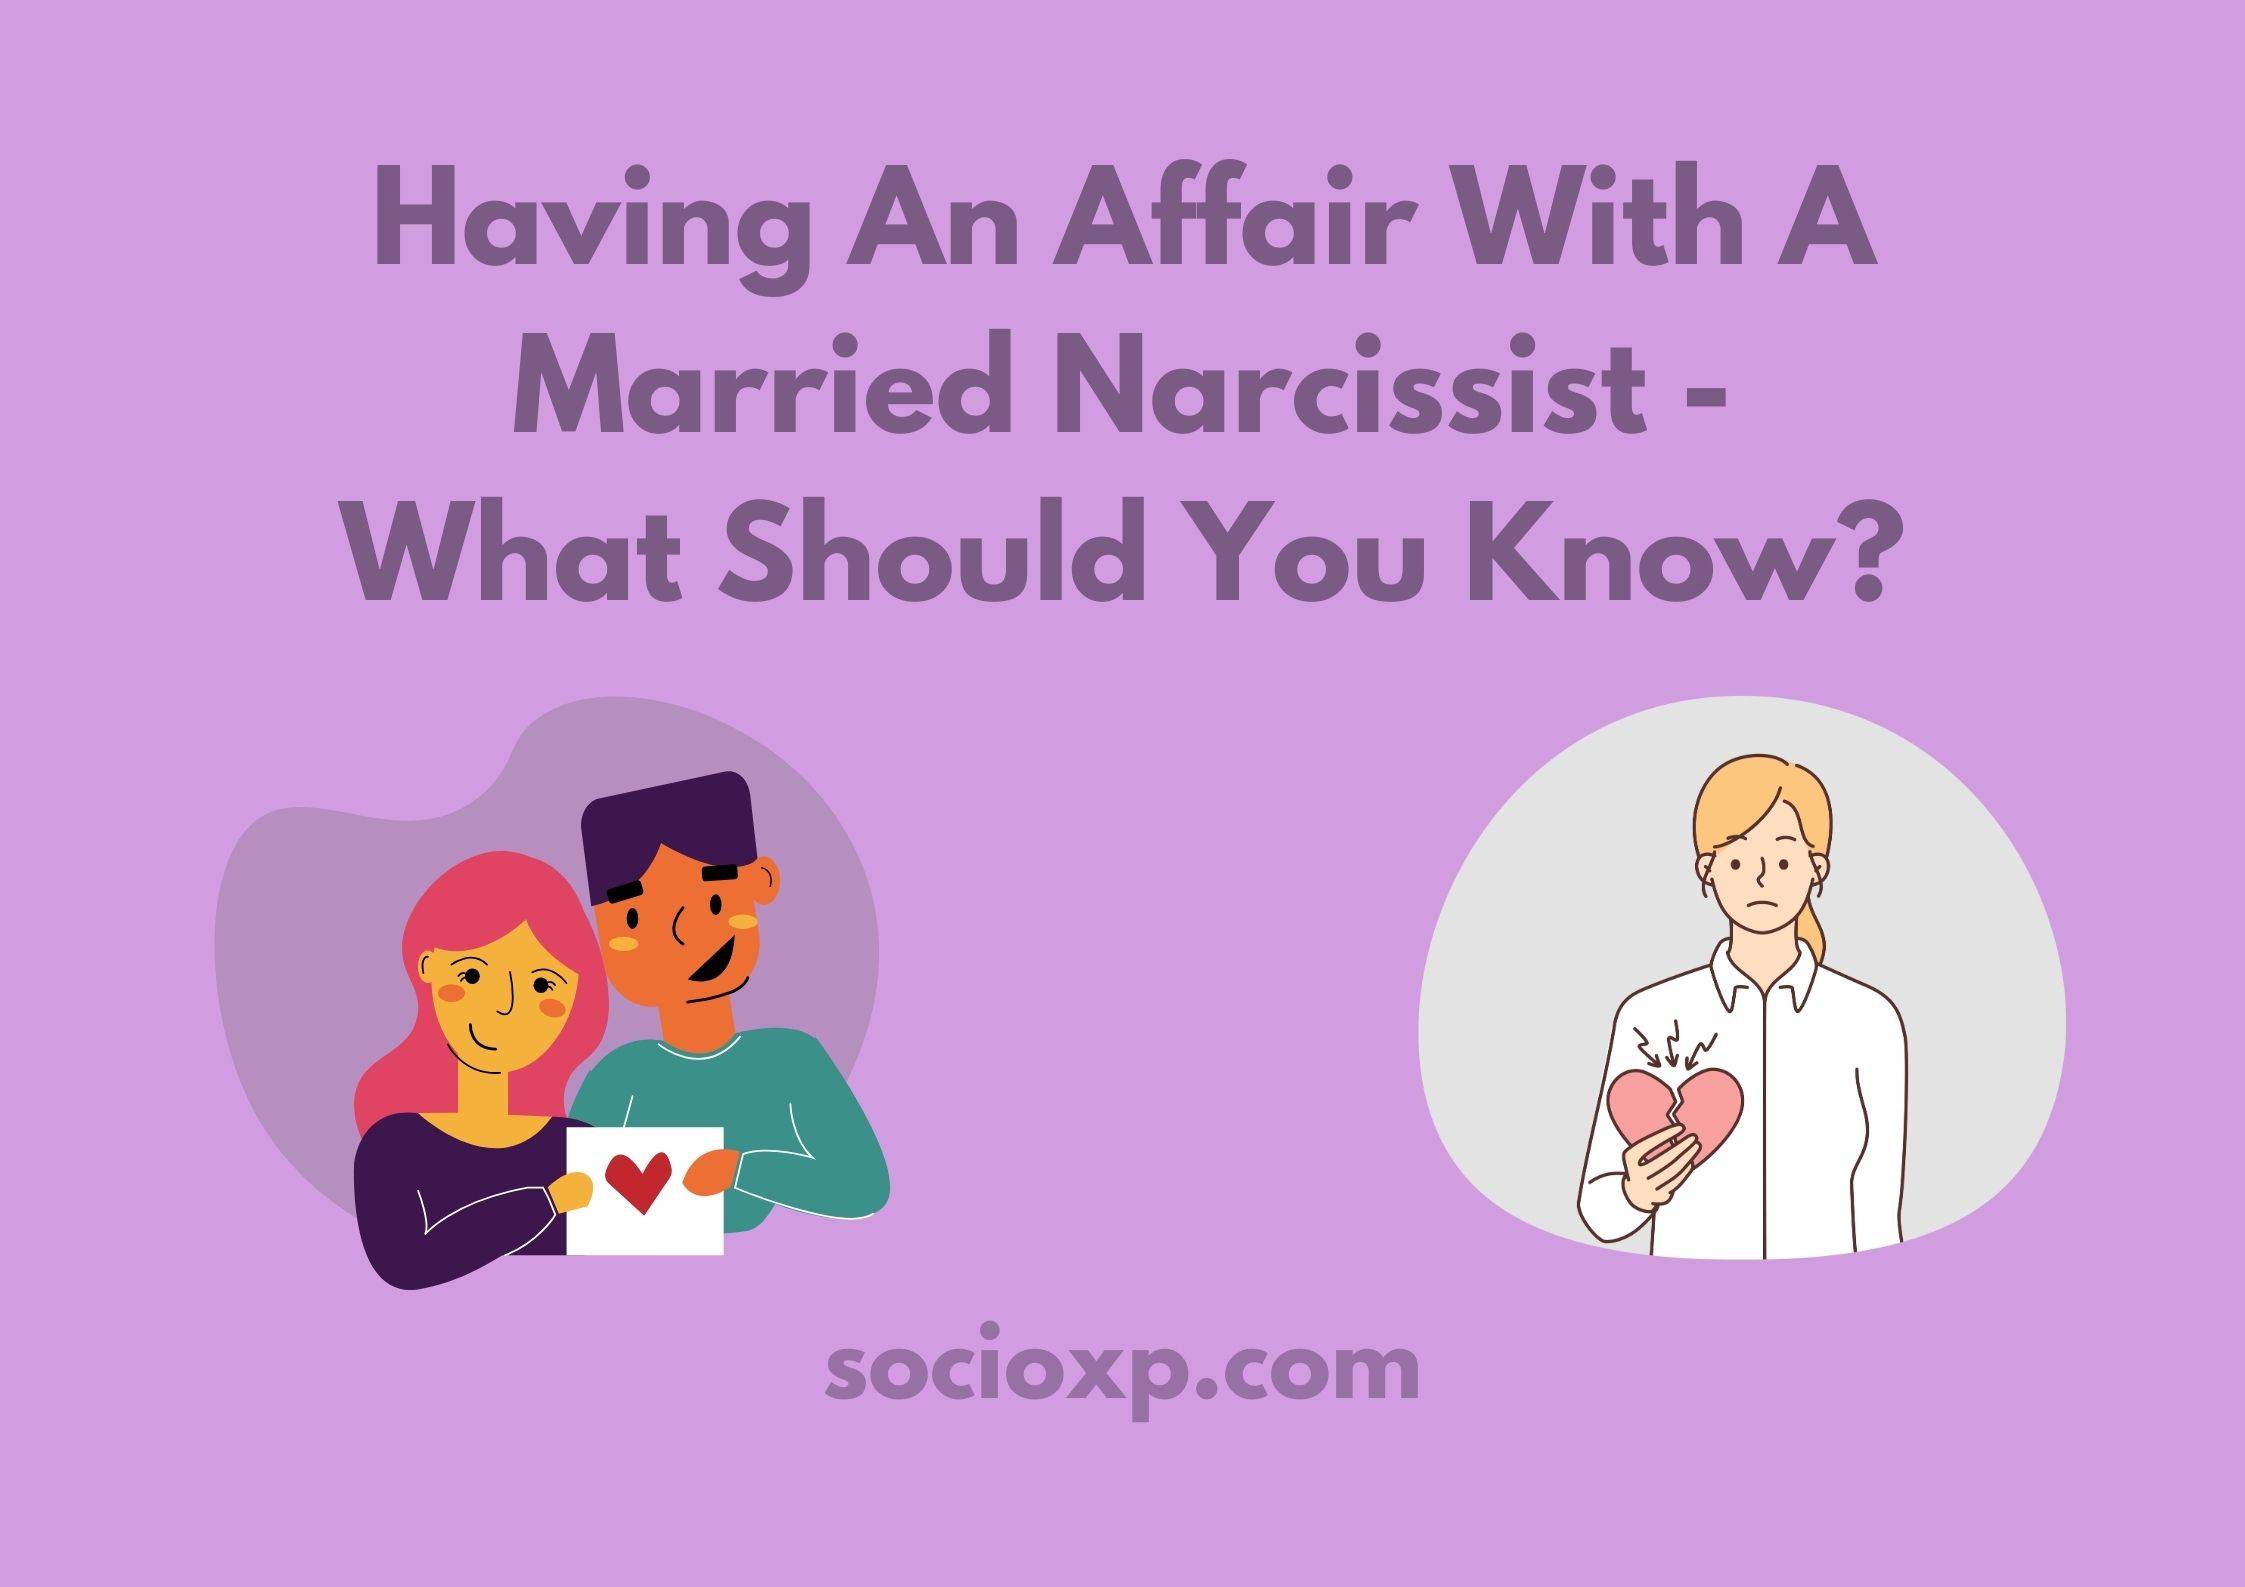 Having An Affair With A Married Narcissist - What Should You Know?